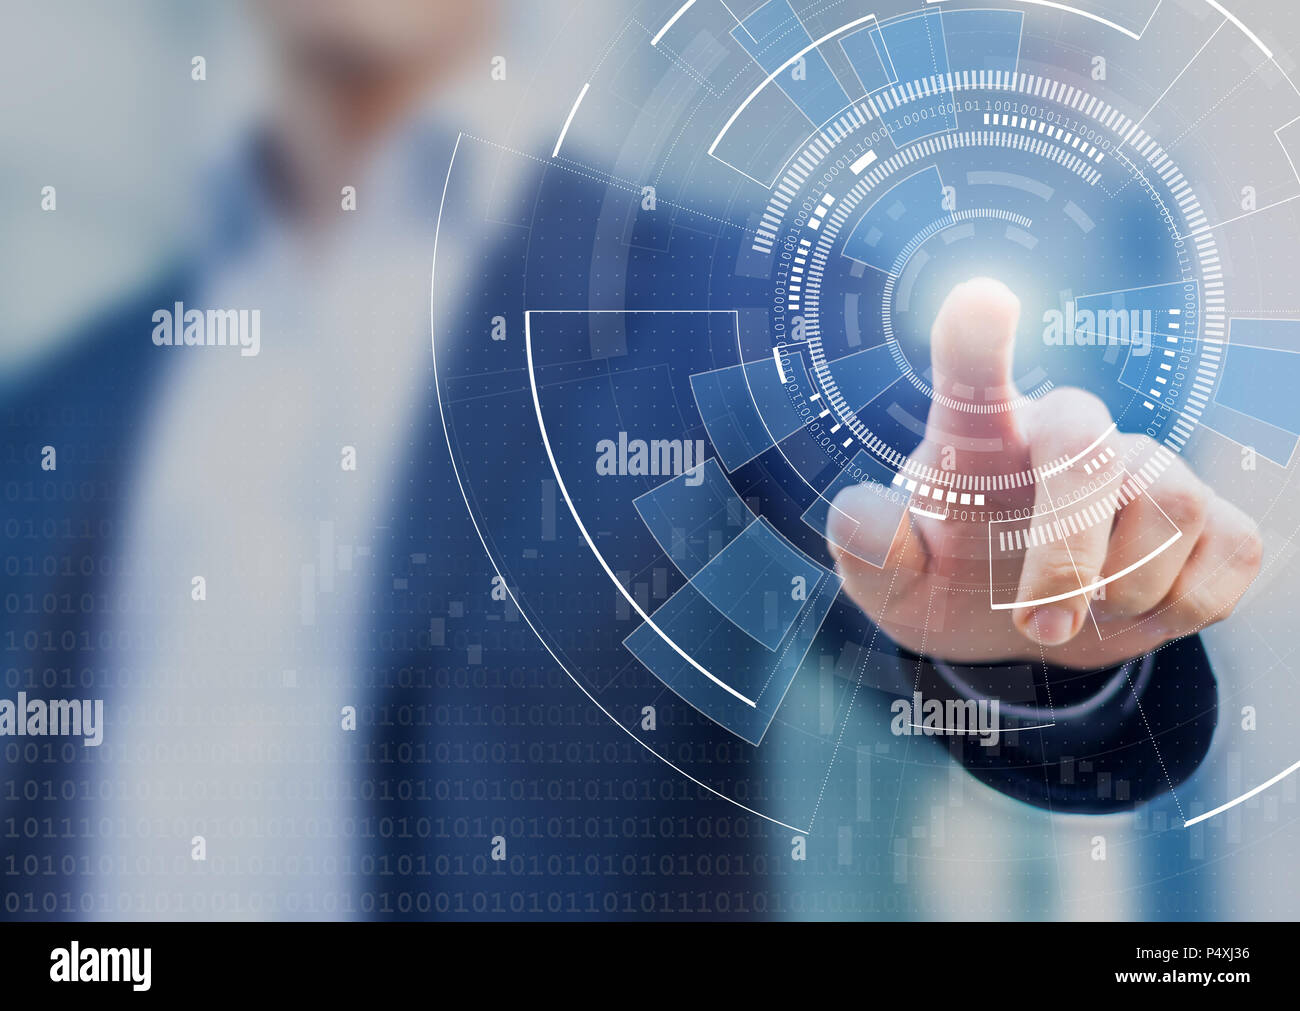 Technology abstract background with person hand touching complex circular diagram on virtual screen with copy-space, innovation, network, big data and Stock Photo